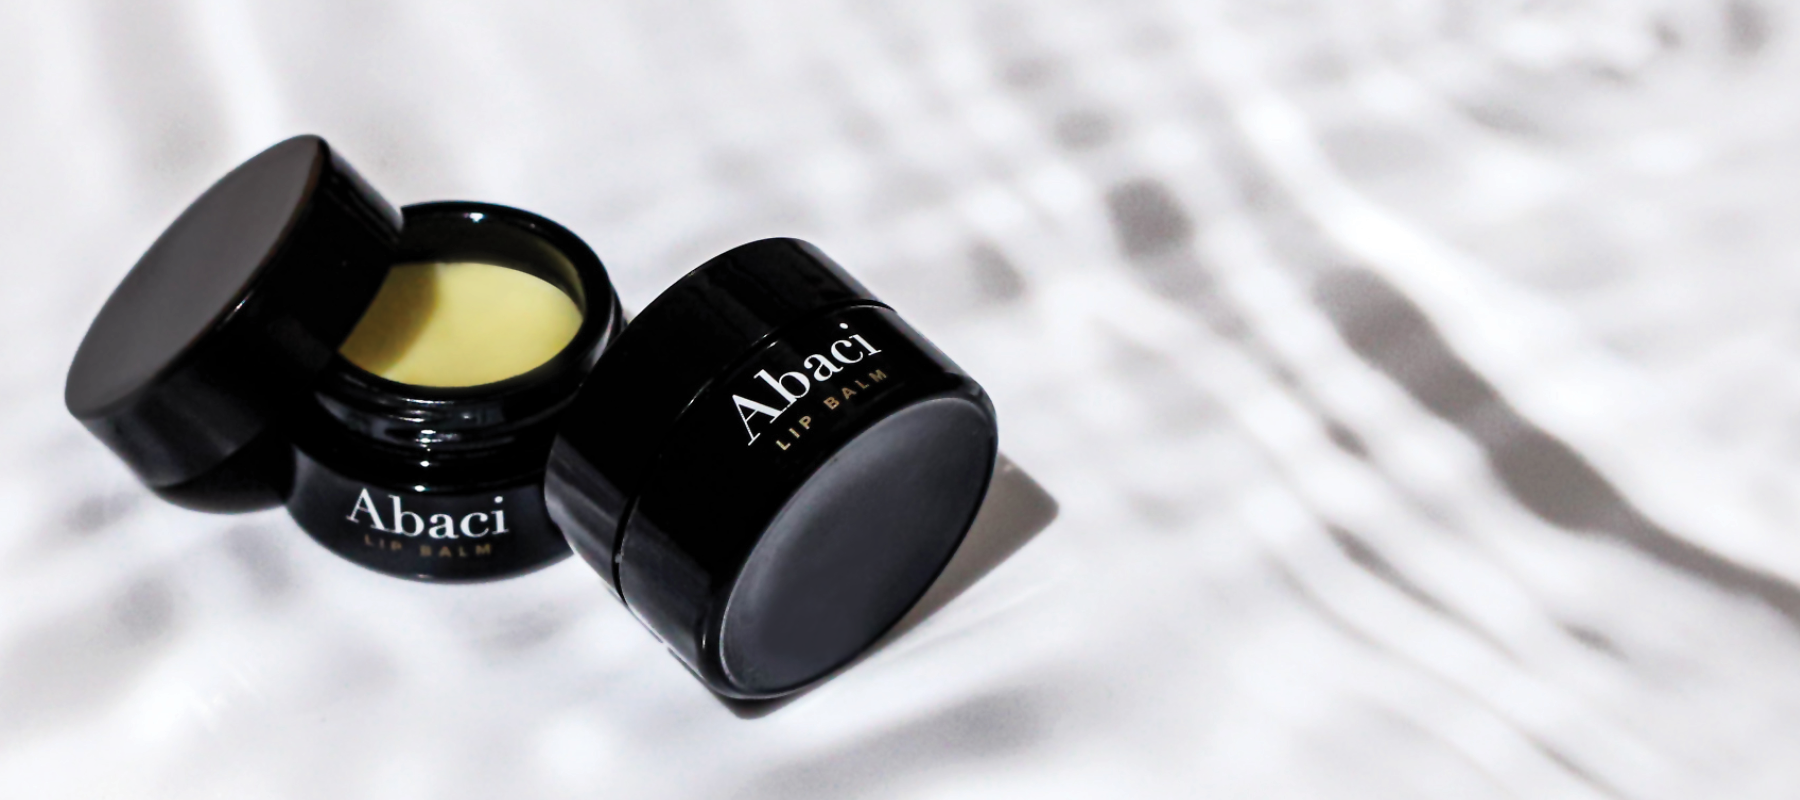 Abaci Organic Lip Balm - Hyaluronic Acid Benefits in Lips - Multiple molecular weights of hyaluronic acid to protect, nourish and deeply moisturize lips.